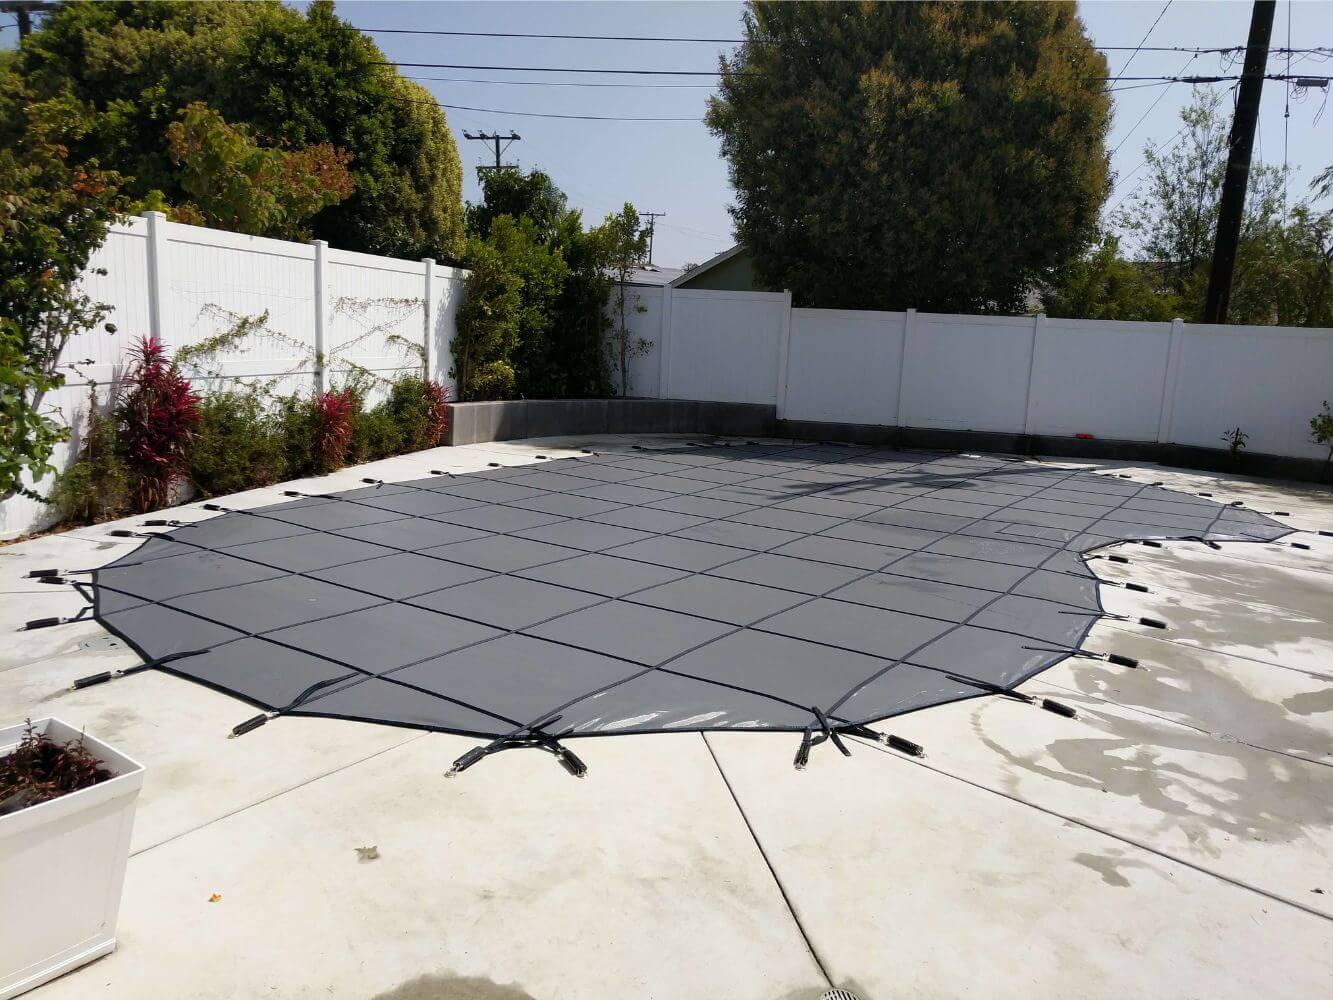 Black swimming pool cover installed on a residential pool